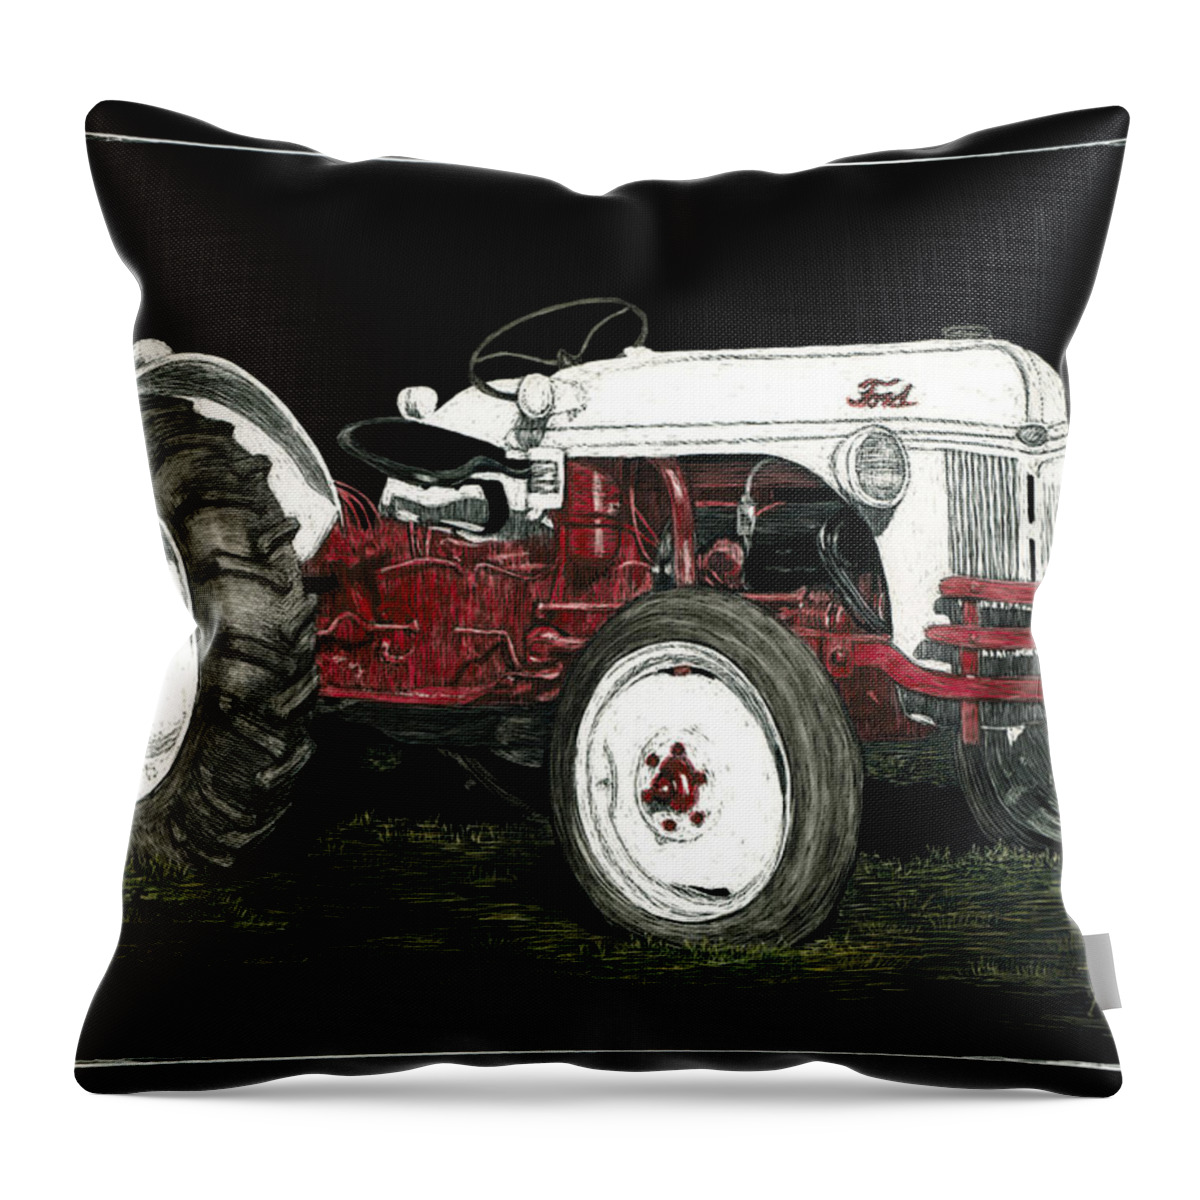 Tractor Throw Pillow featuring the photograph 20 Horses #1 by Ann Ranlett